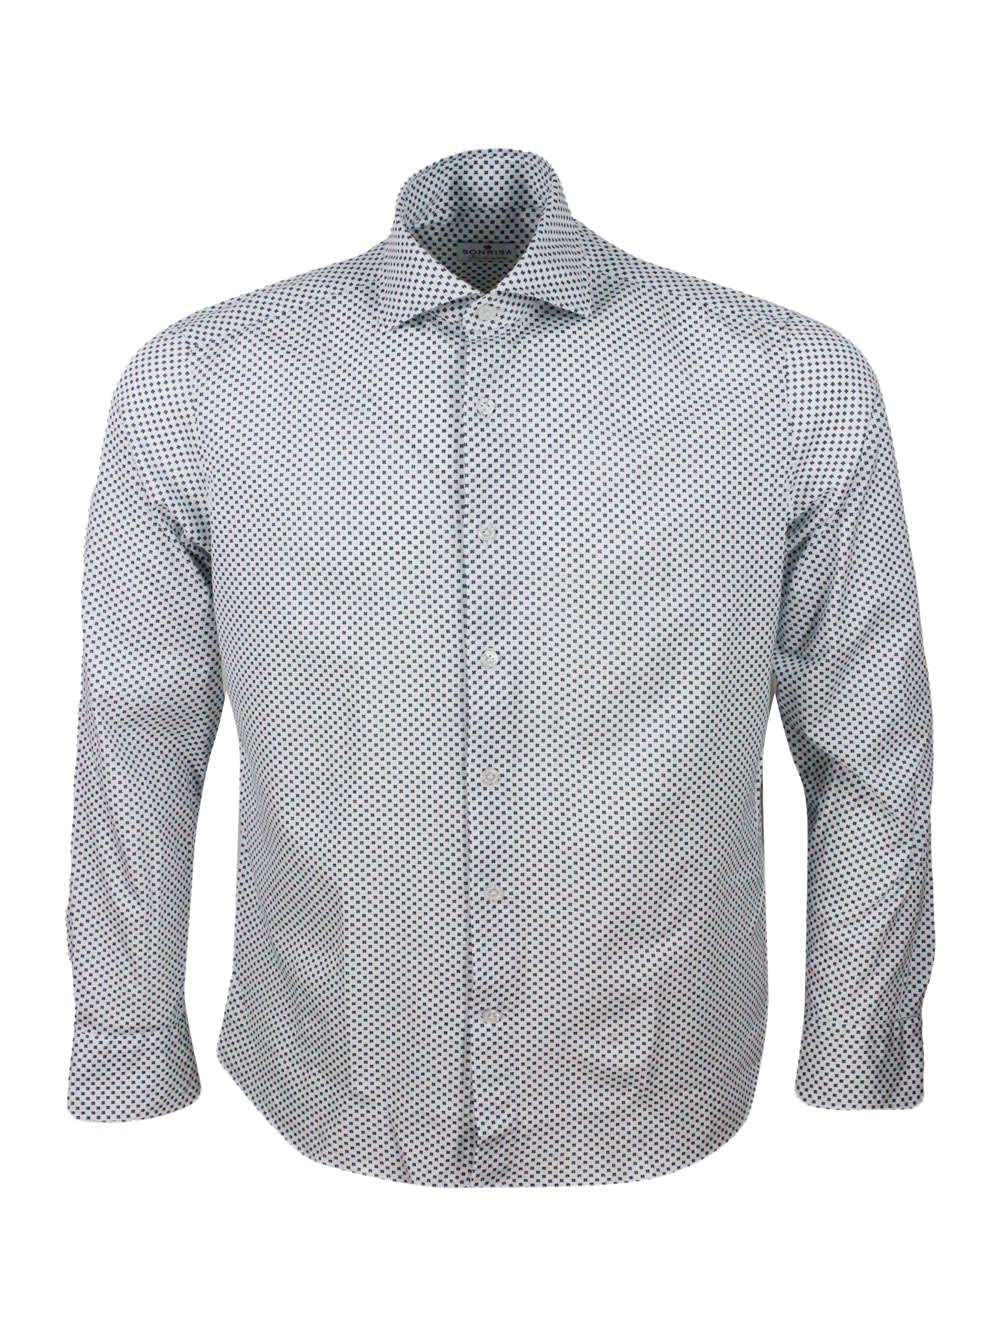 SONRISA LUXURY SHIRT IN SOFT, PRECIOUS AND VERY FINE STRETCH COTTON FLOWER WITH FRENCH COLLAR IN SMALL BLUE 